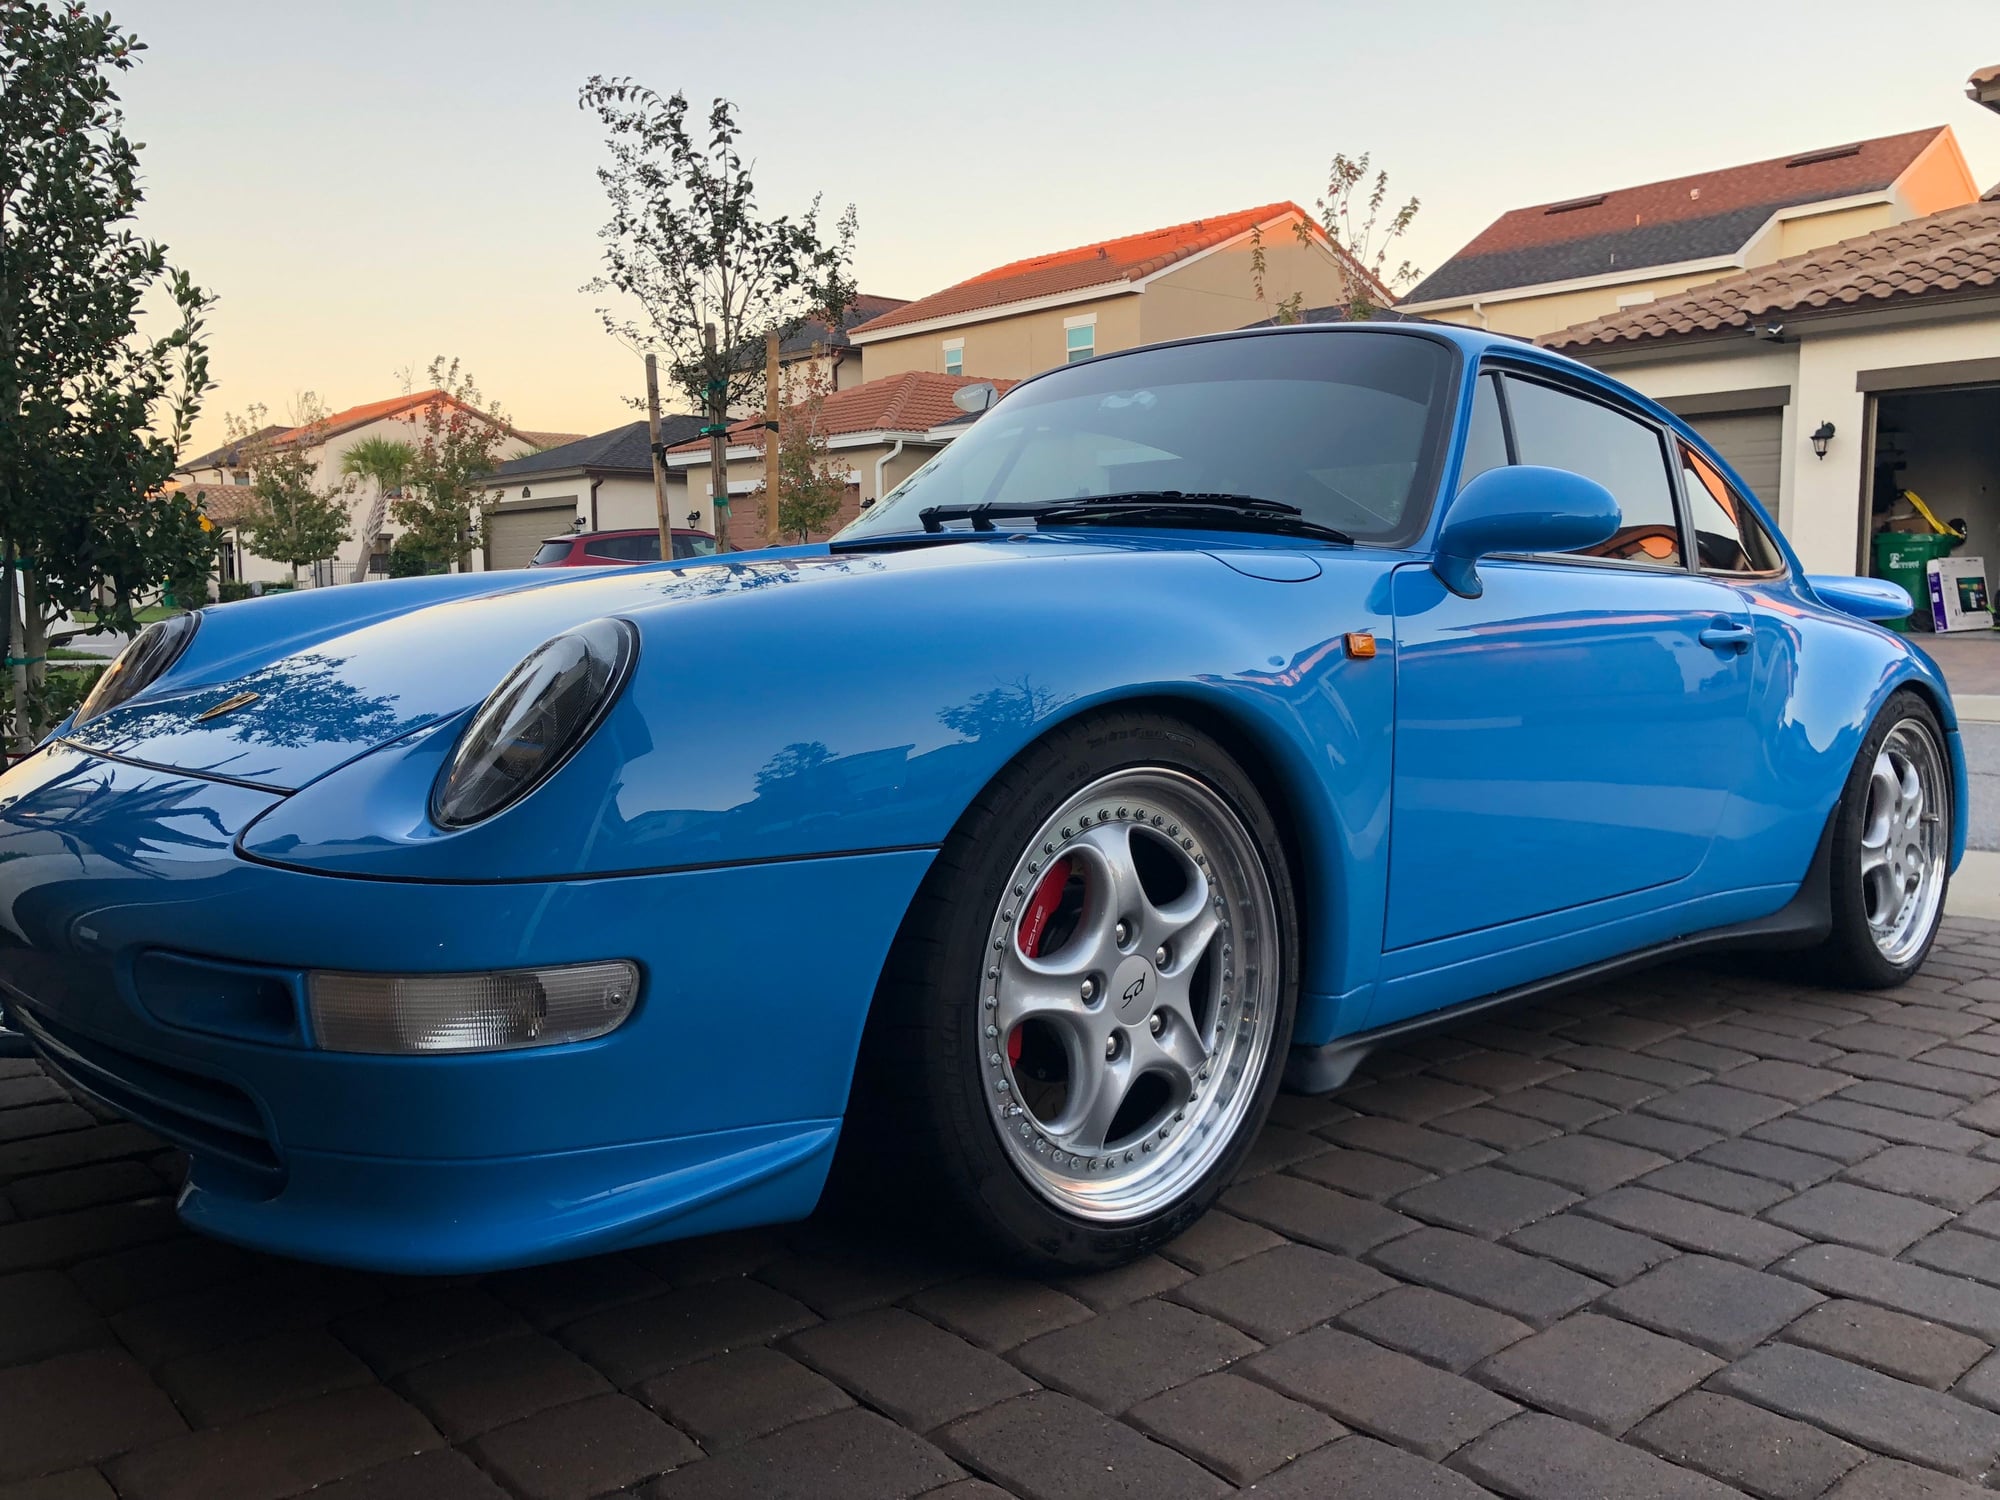 1995 Porsche 911 - 1995 Carrera RS Clone - Used - VIN WP0AA2999SS323842 - 7,200 Miles - 6 cyl - 2WD - Manual - Coupe - Blue - Melbourne, FL 32940, United States